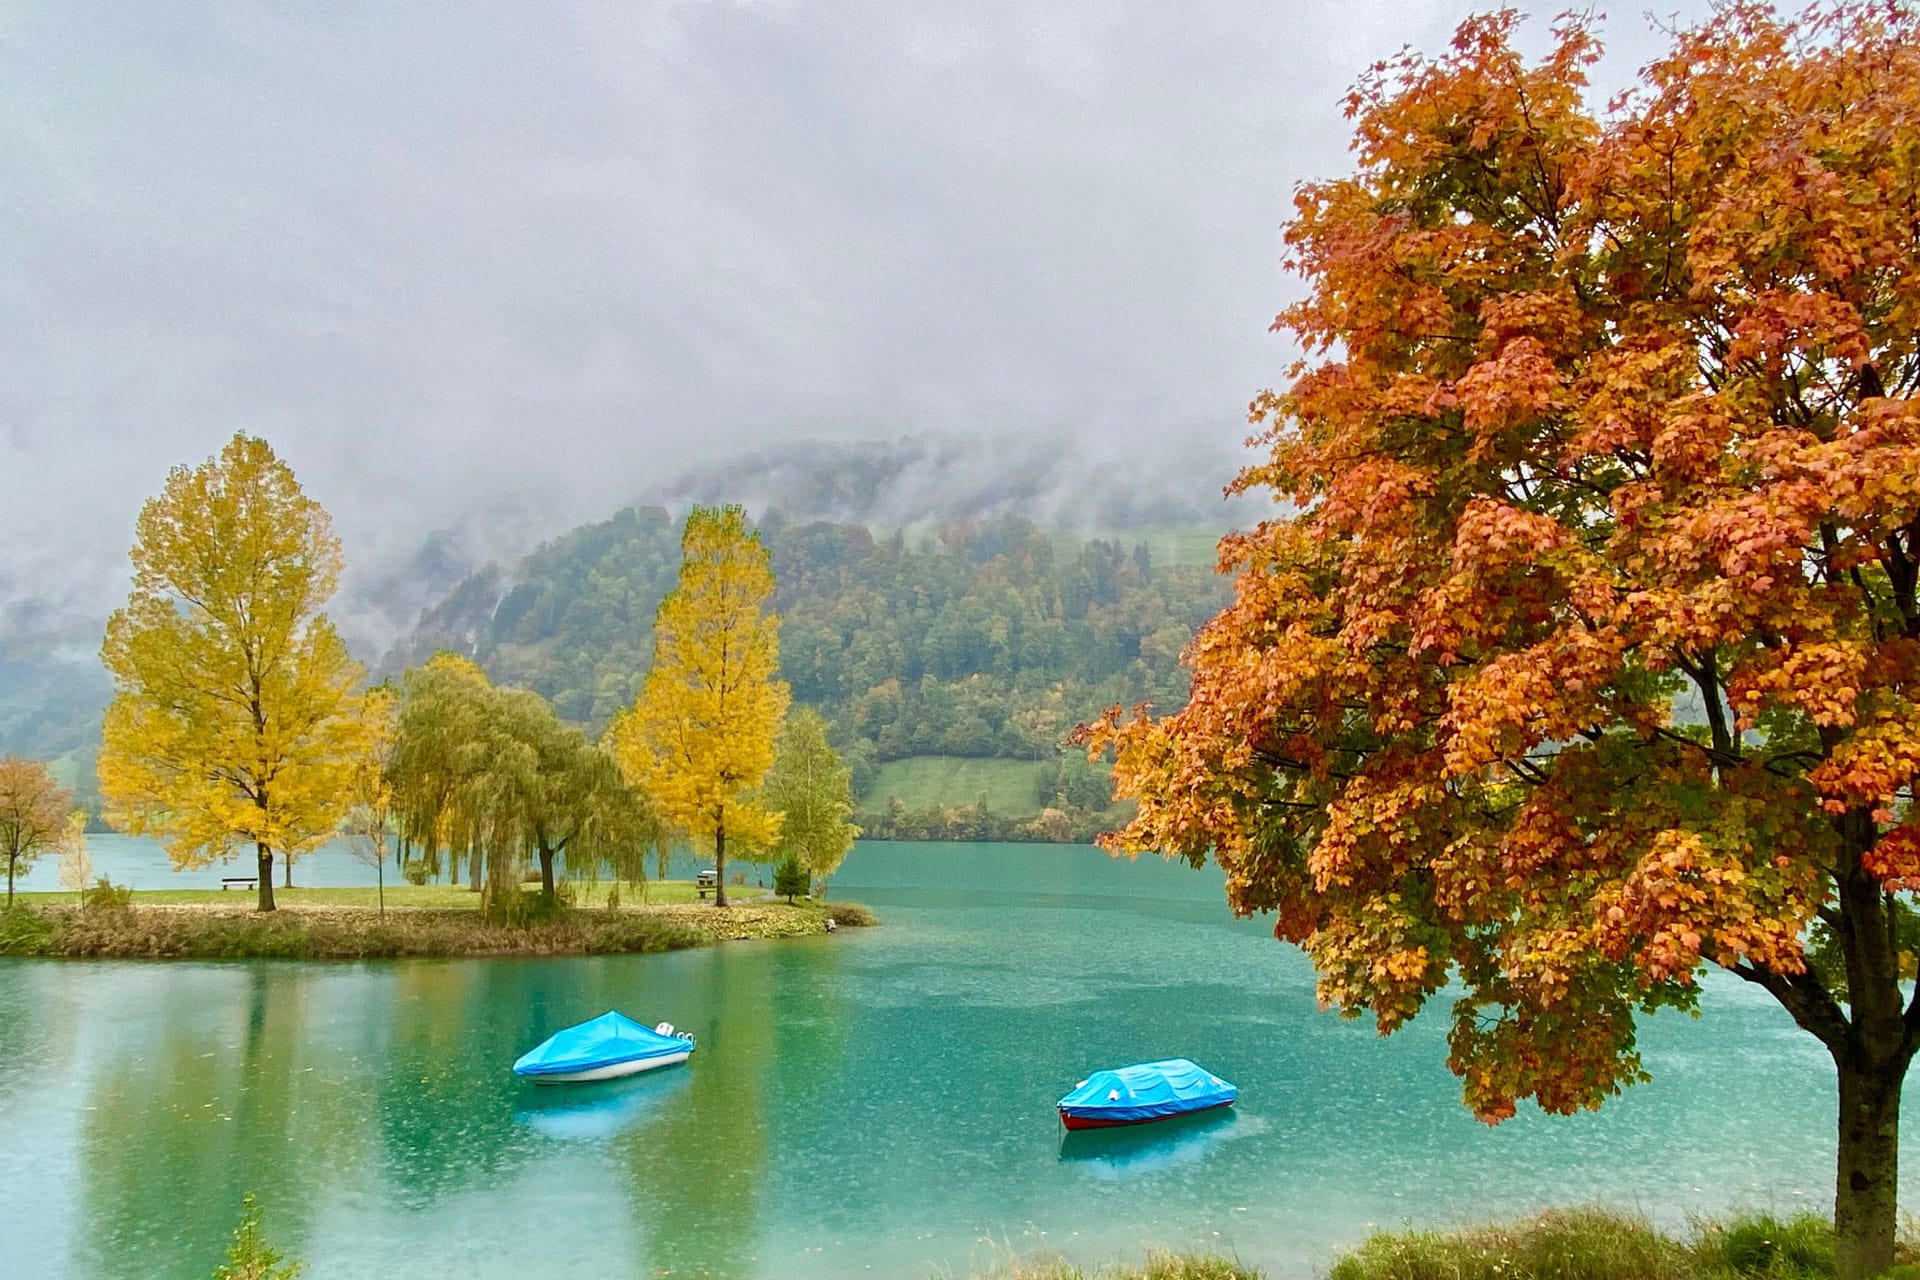 Hidden gems Private Day Tour: The Natural of Wonders of Switzerland (from Bern)